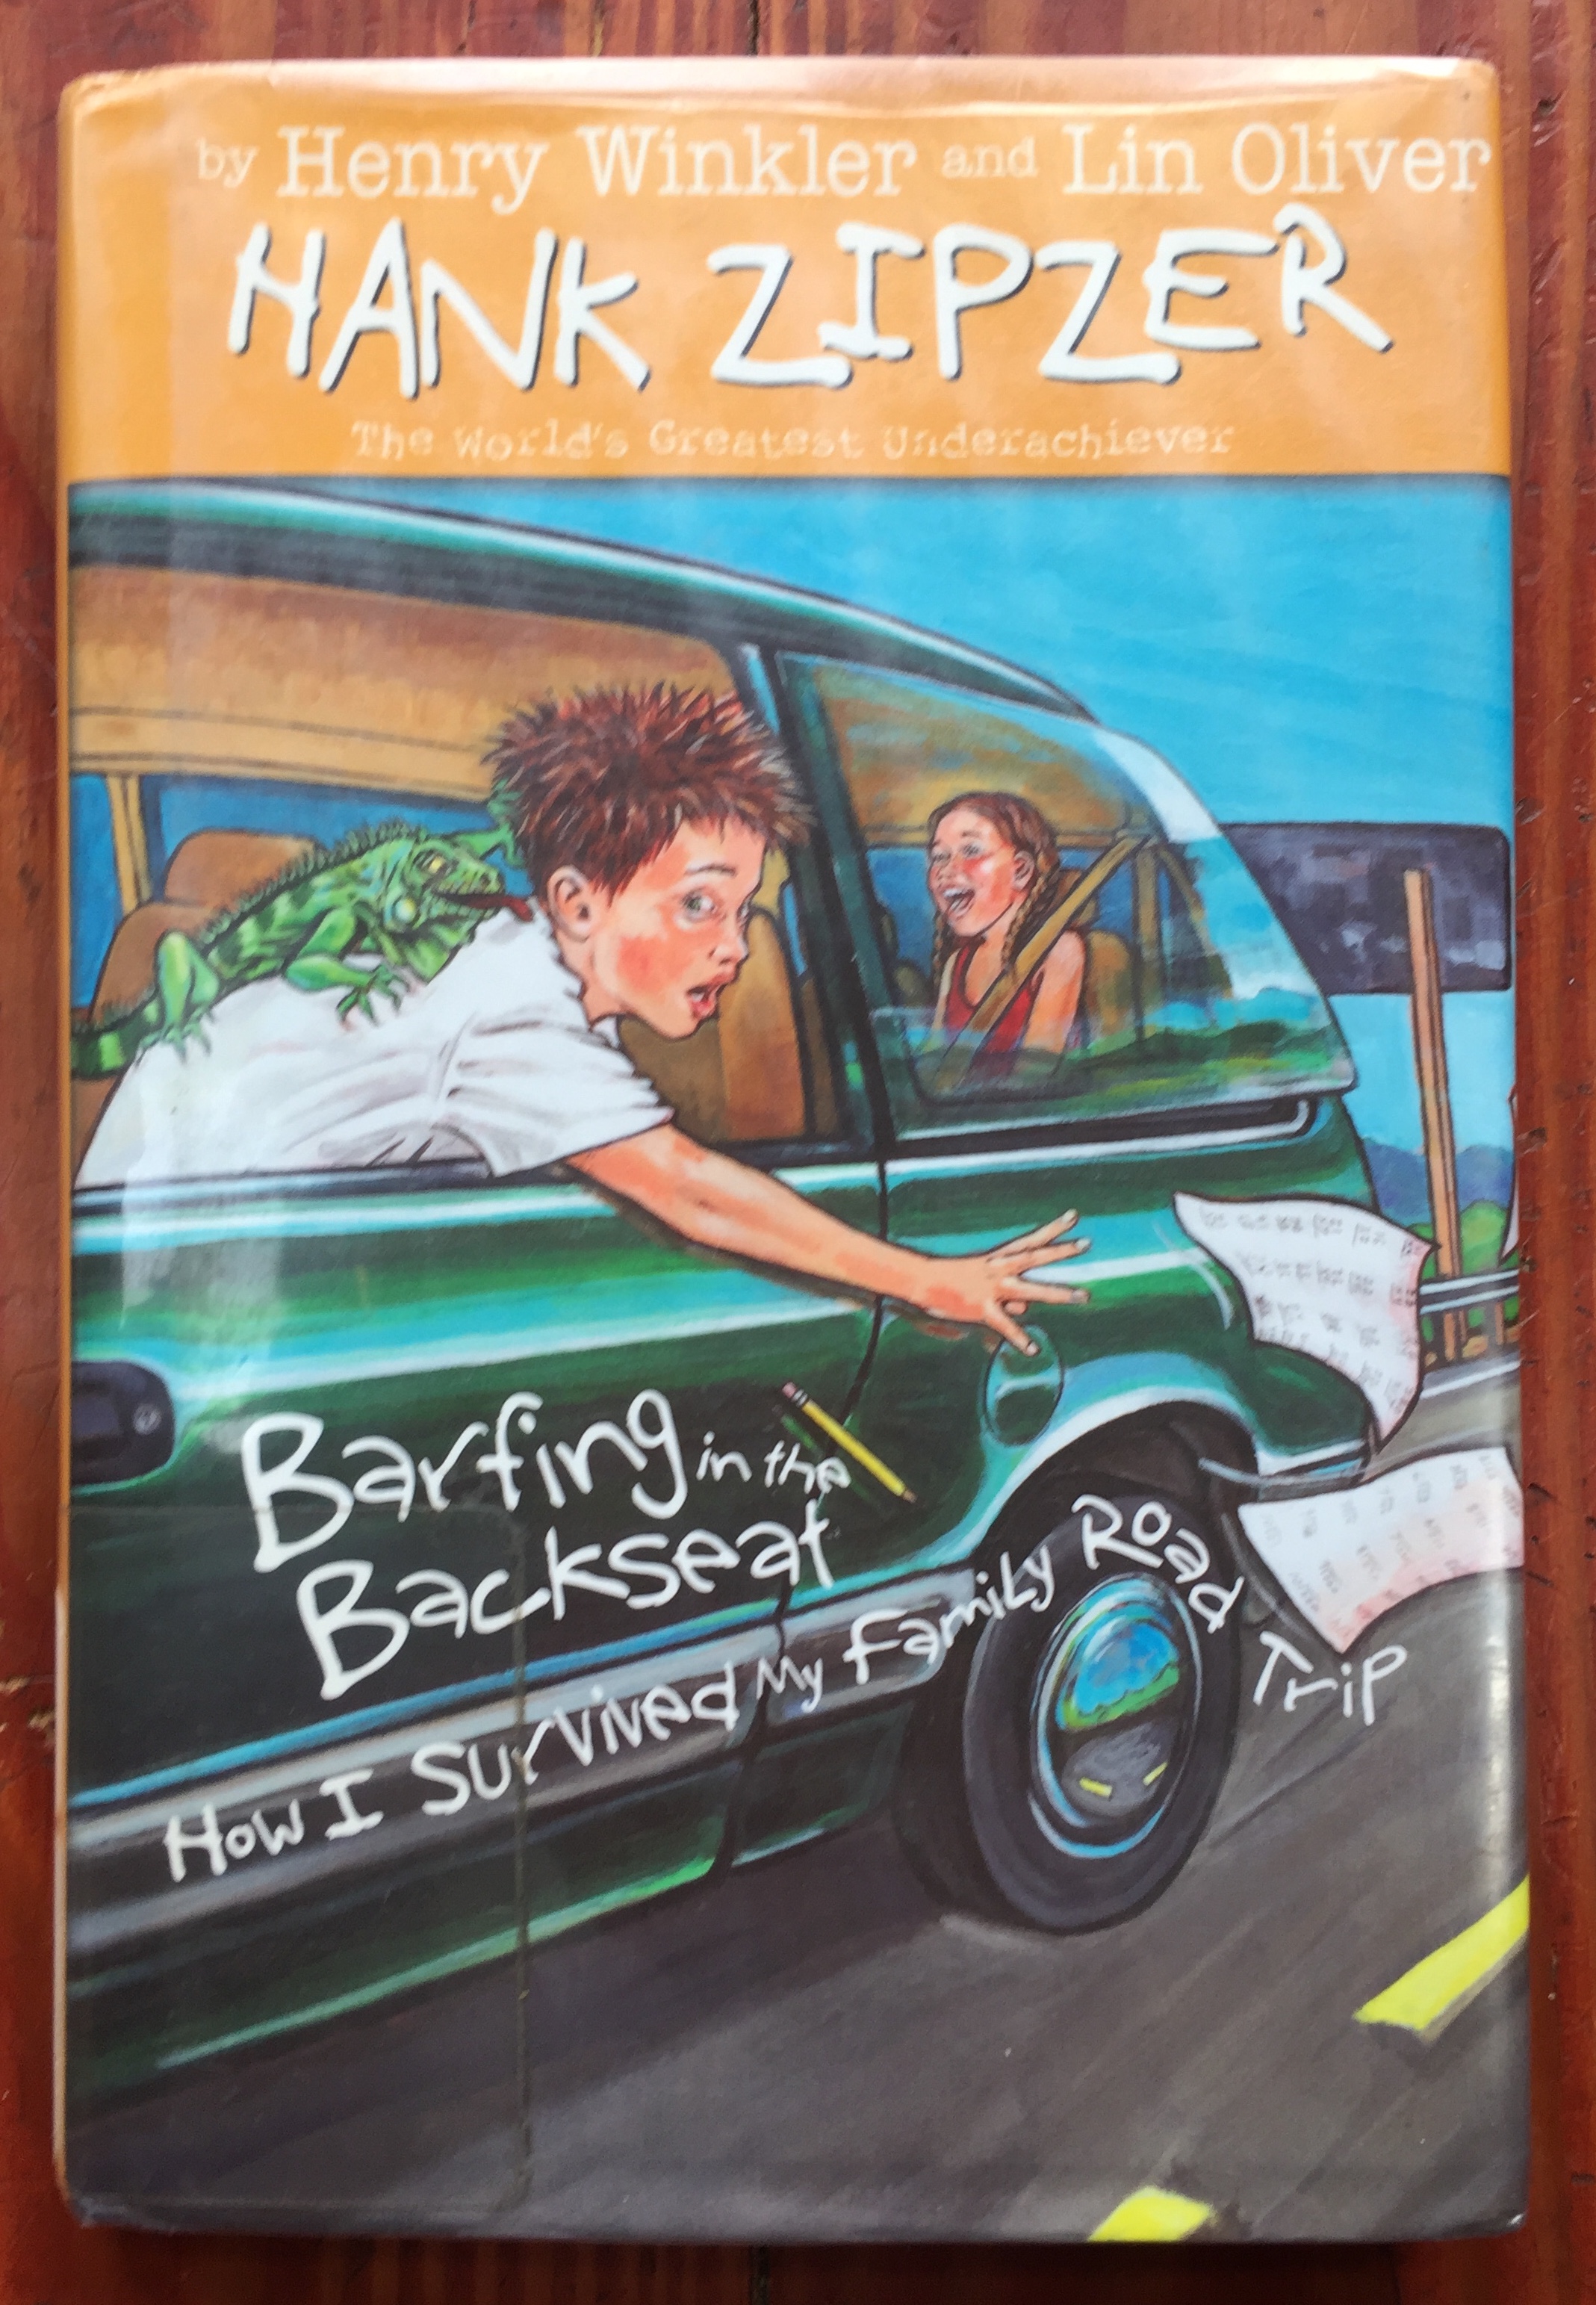 Barfing in the Back Seat book Hank Zipzer by Henry Winkler and Lin Oliver